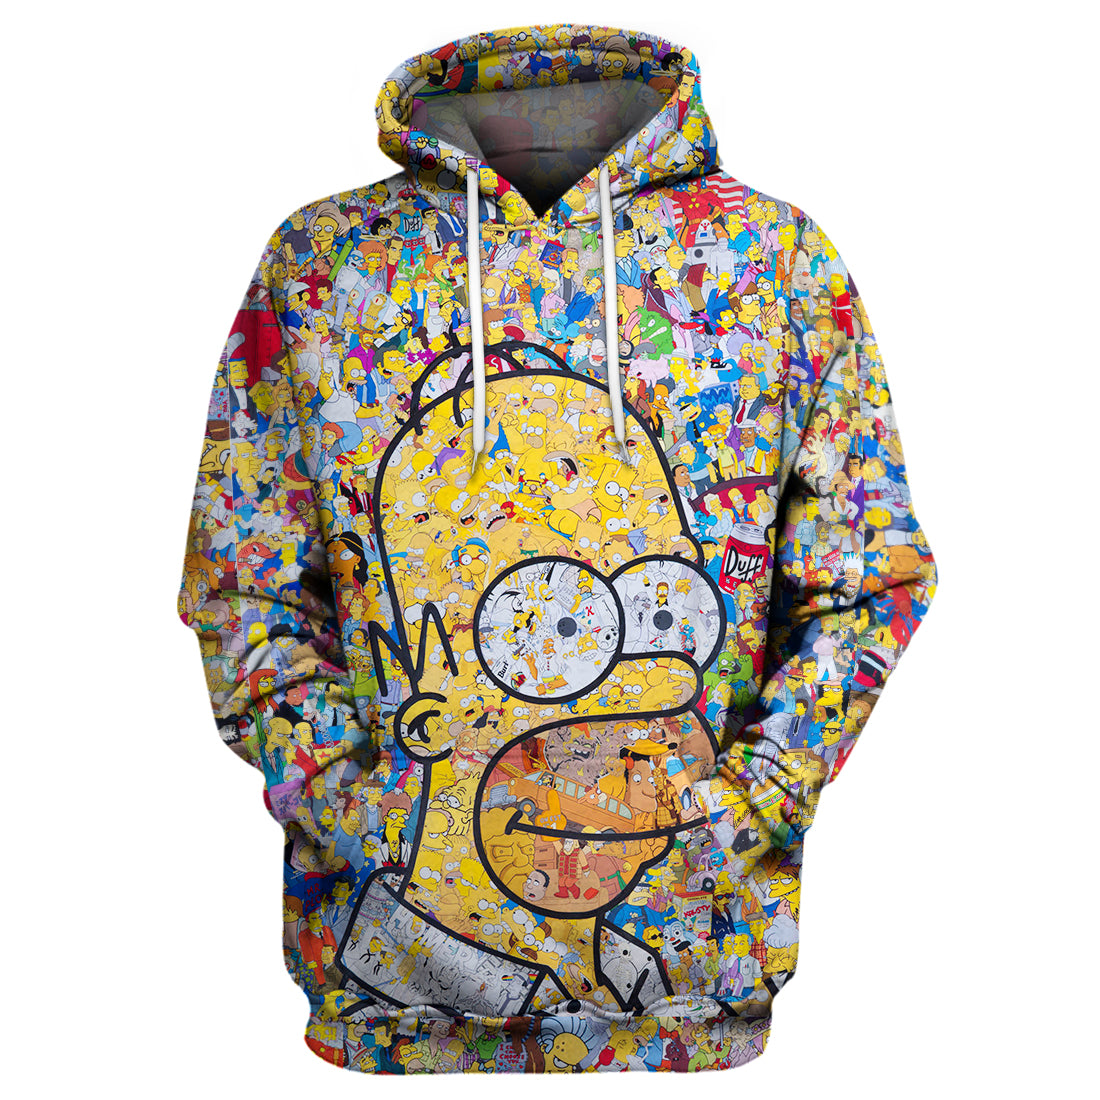 Unifinz The Simpsons Hoodie The Simpsons Art 3D Print T-shirt Awesome The Simpsons Shirt Sweater Tank 2022